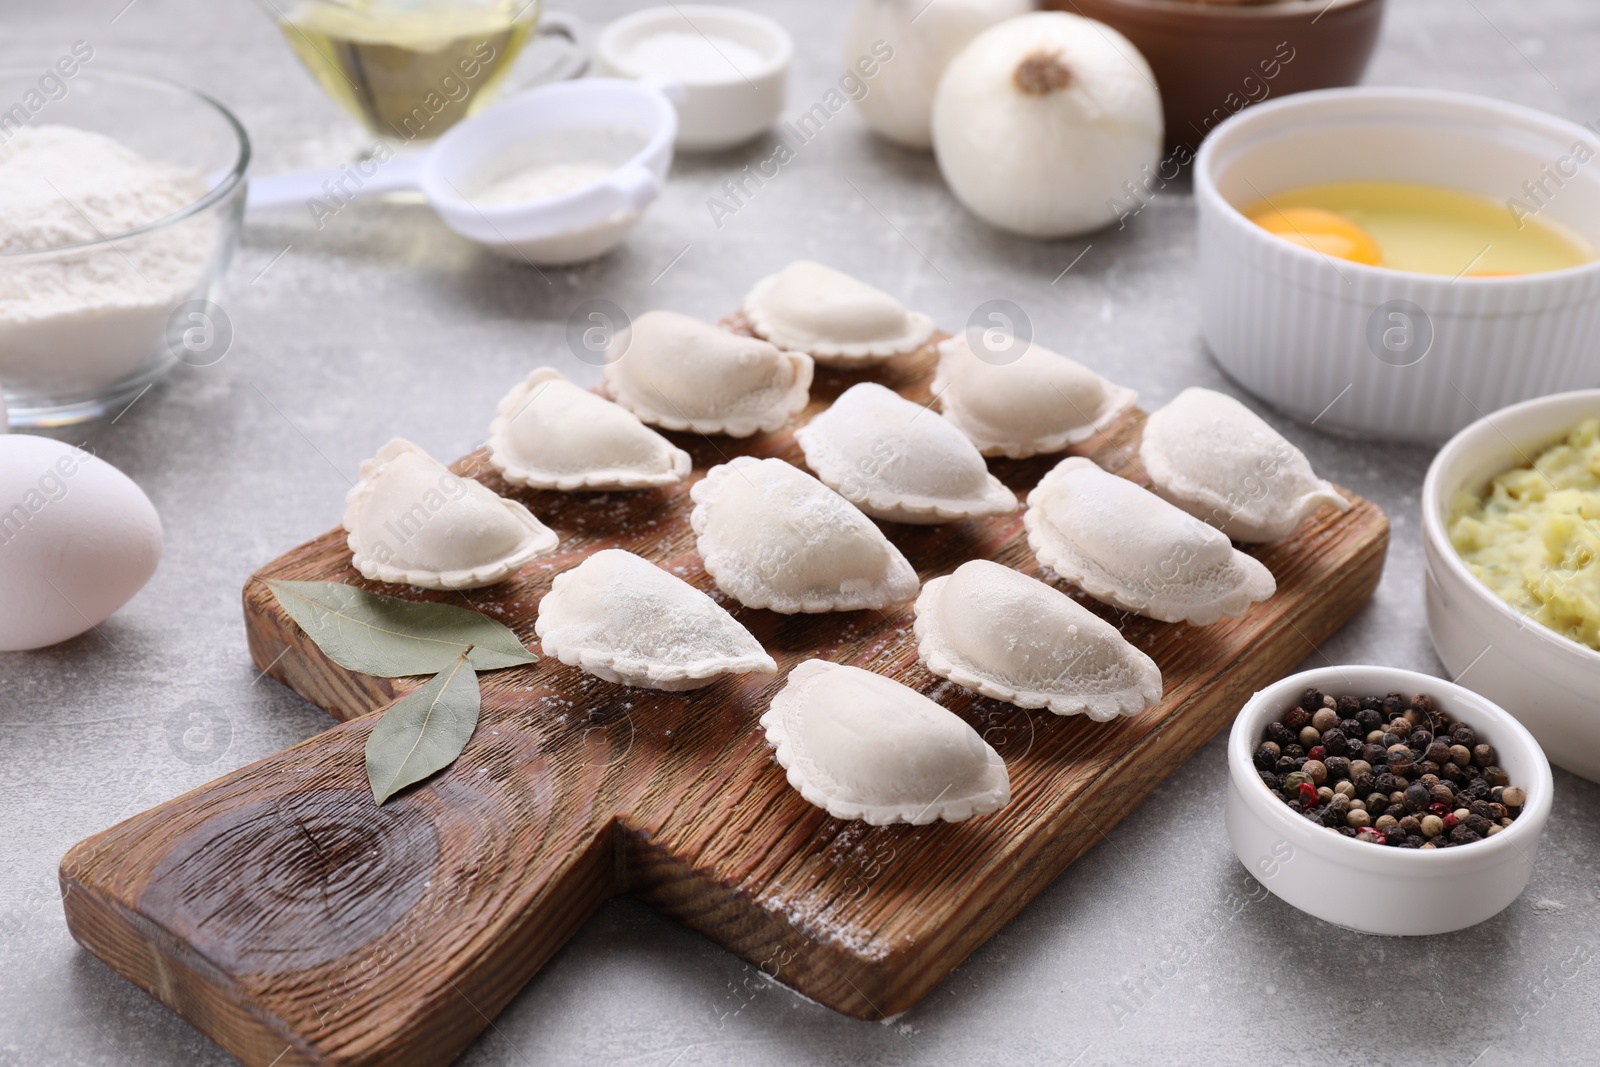 Photo of Raw dumplings (varenyky) and ingredients on grey table